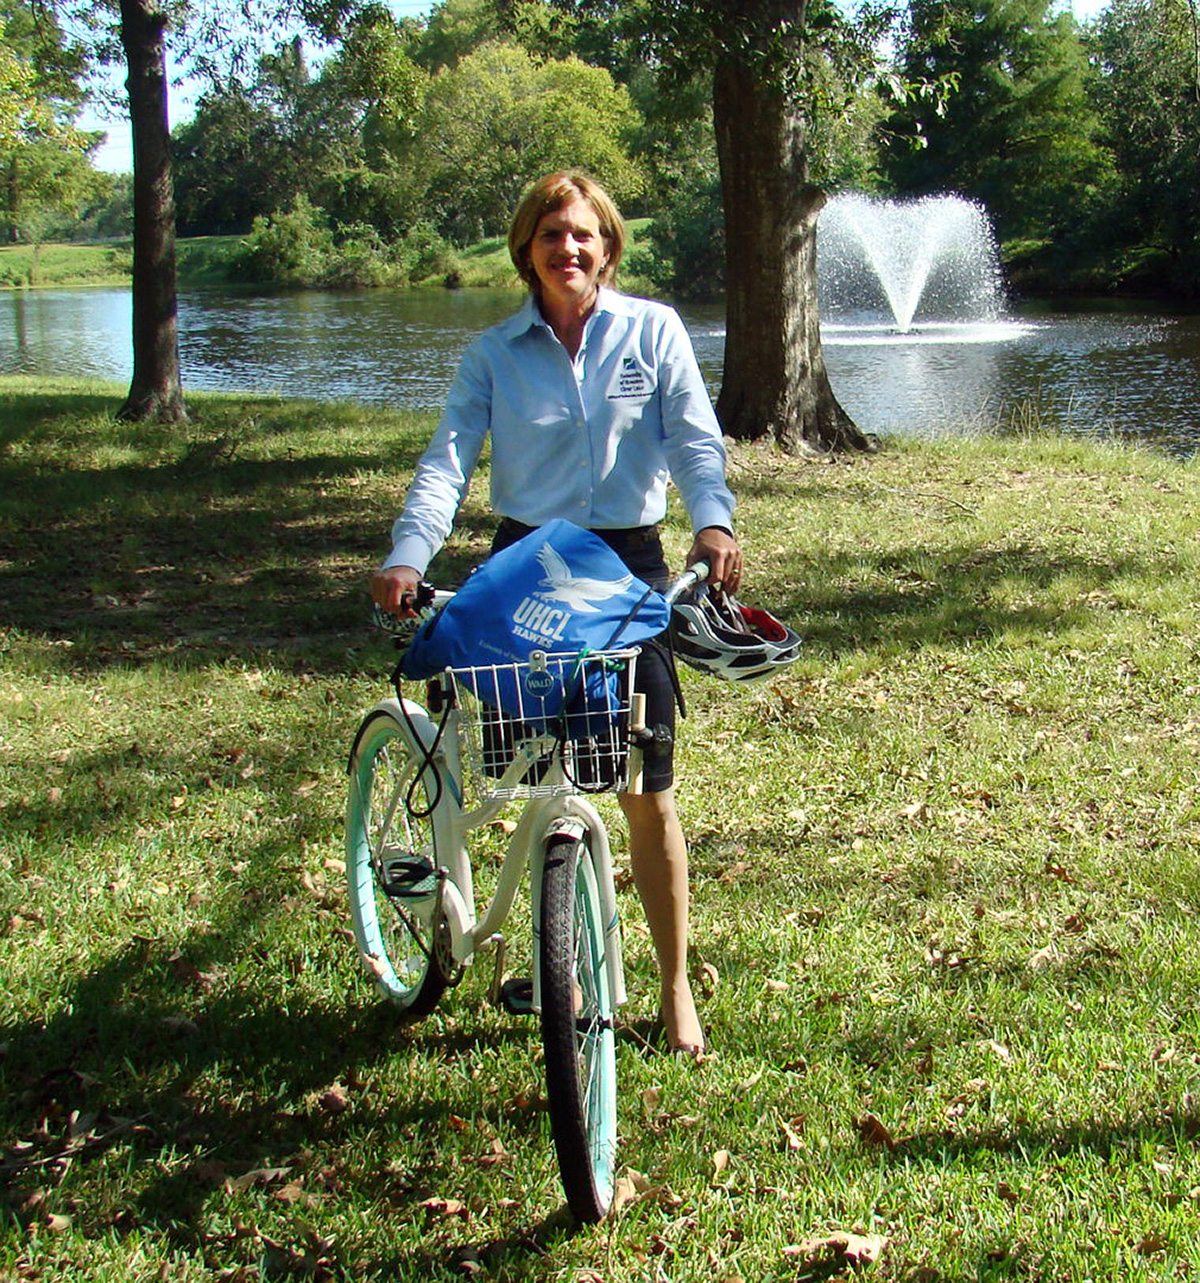 Image: Karen Barbier, associate director of university communications-media relations, on her bike that she rides to work by the pond. Photo by The Signal reporter Kyle Upton.